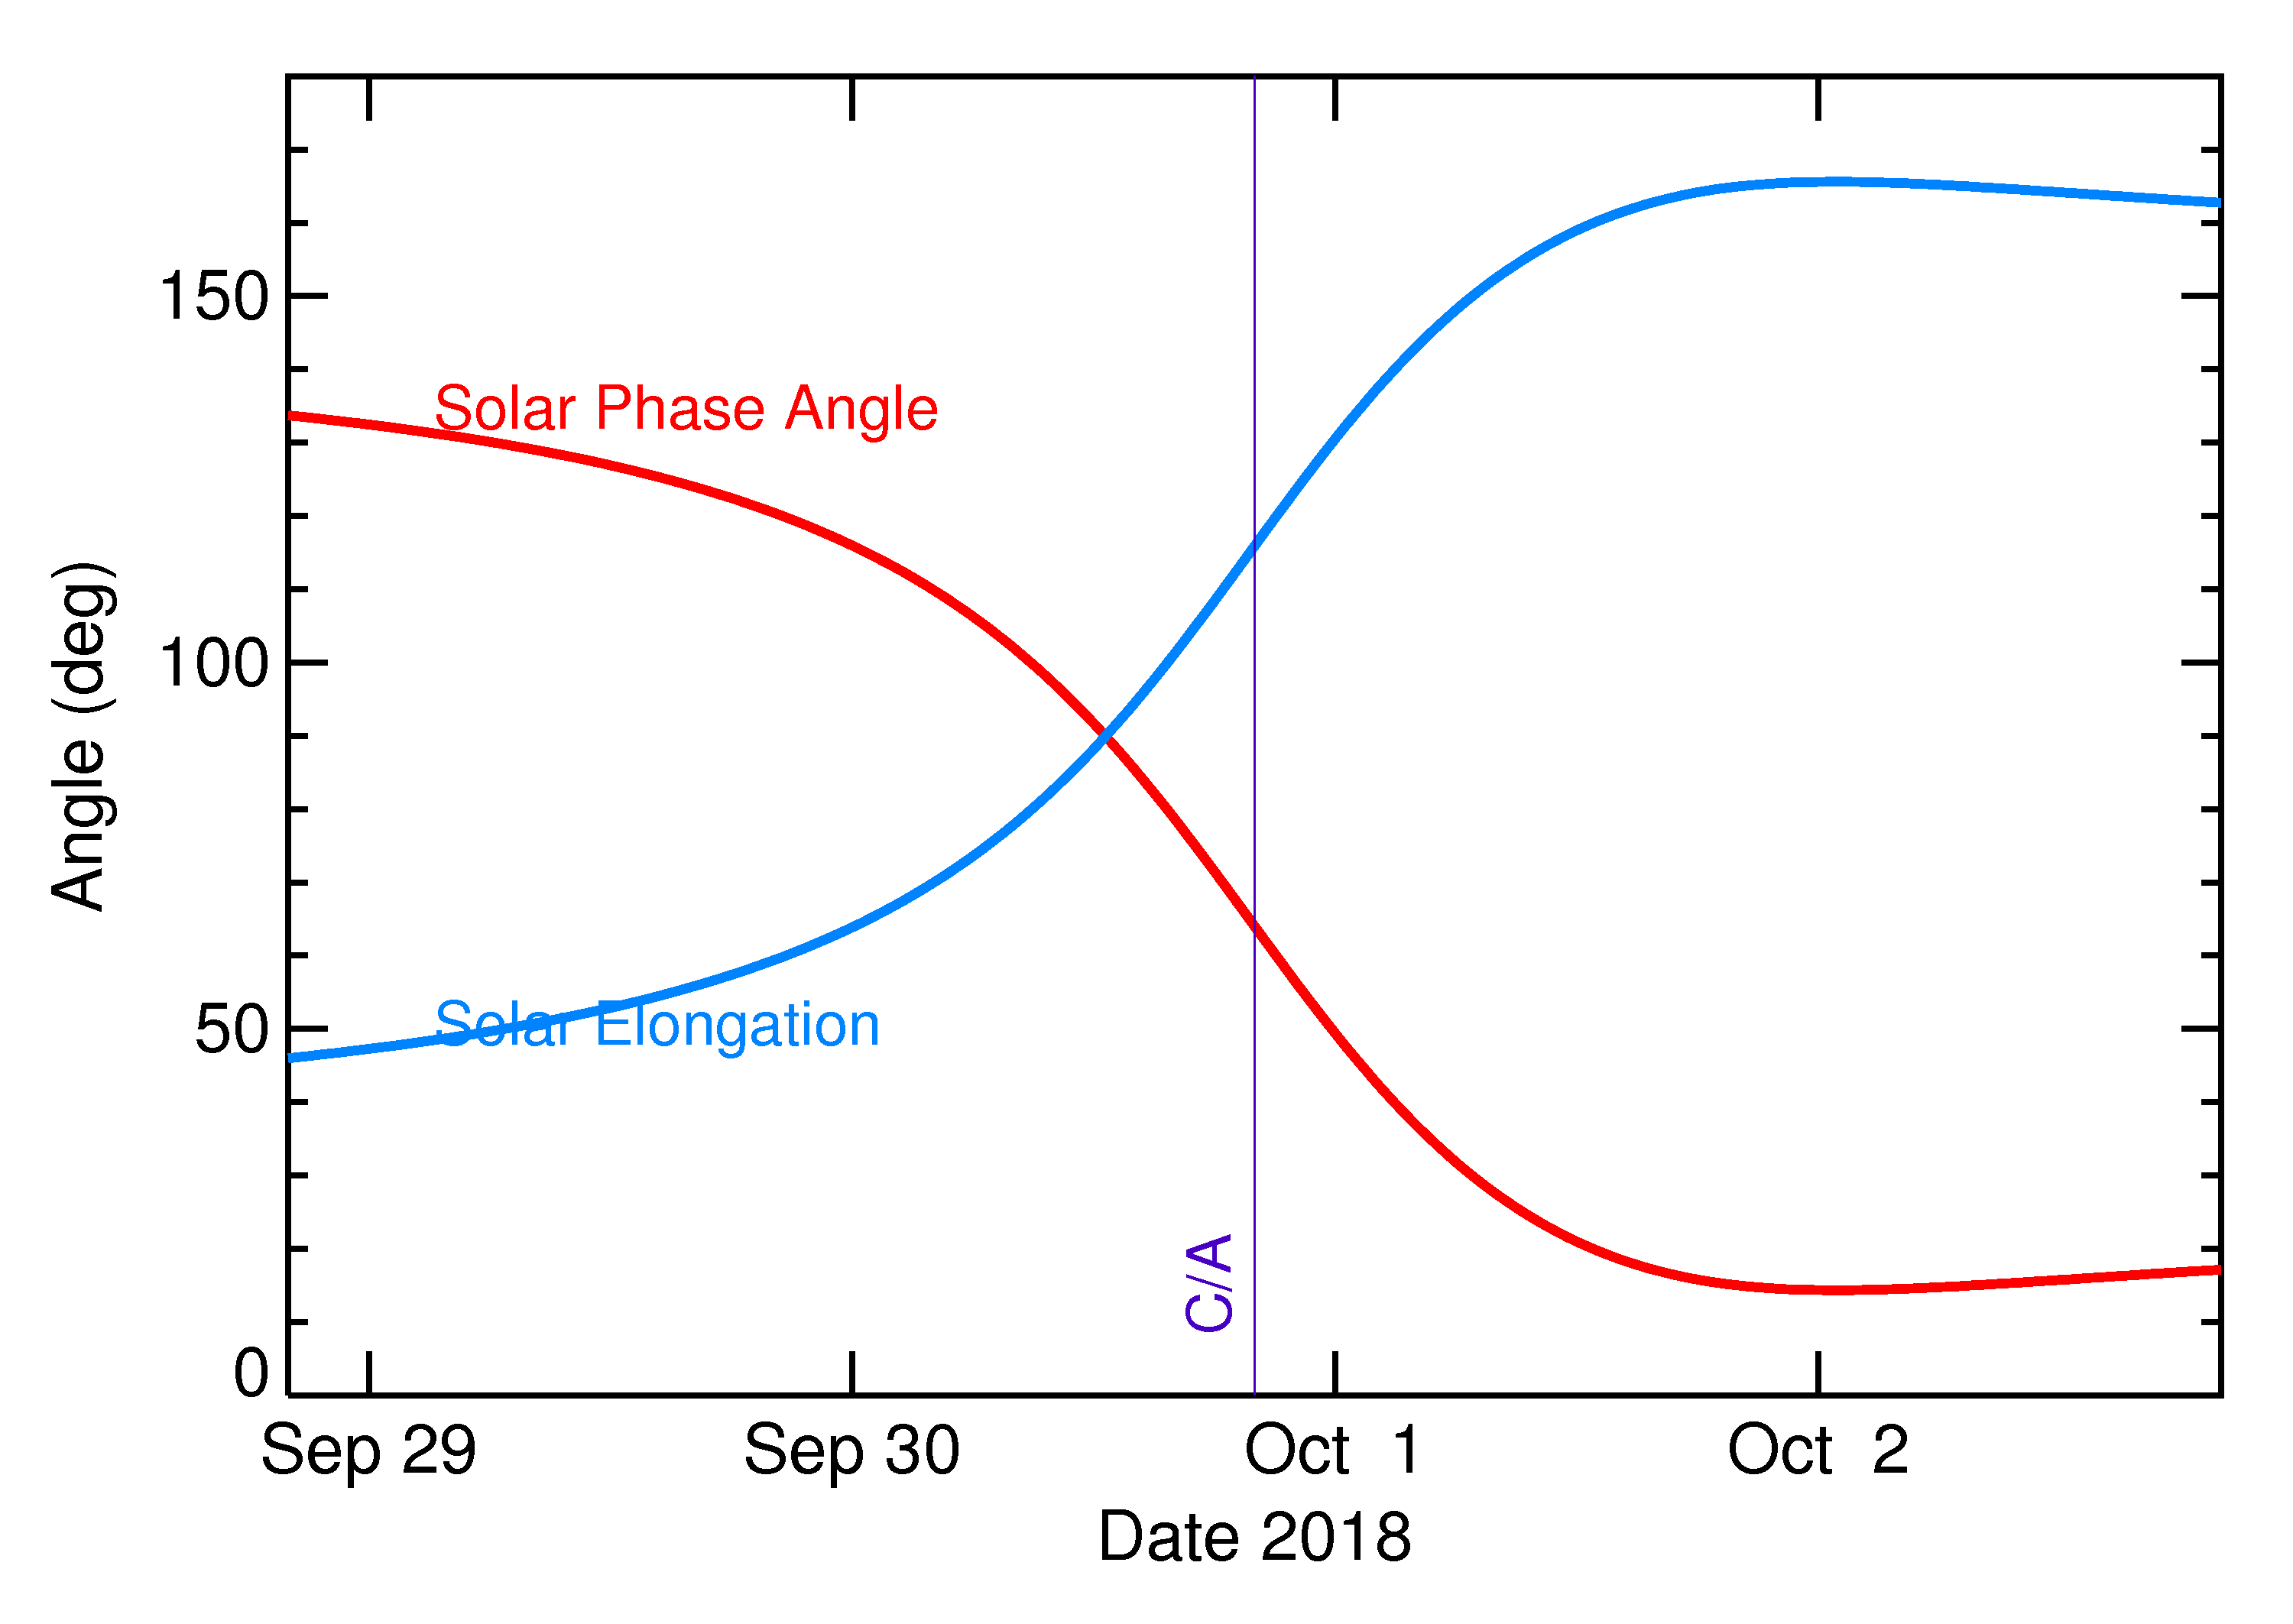 Solar Elongation and Solar Phase Angle of 2018 TC in the days around closest approach